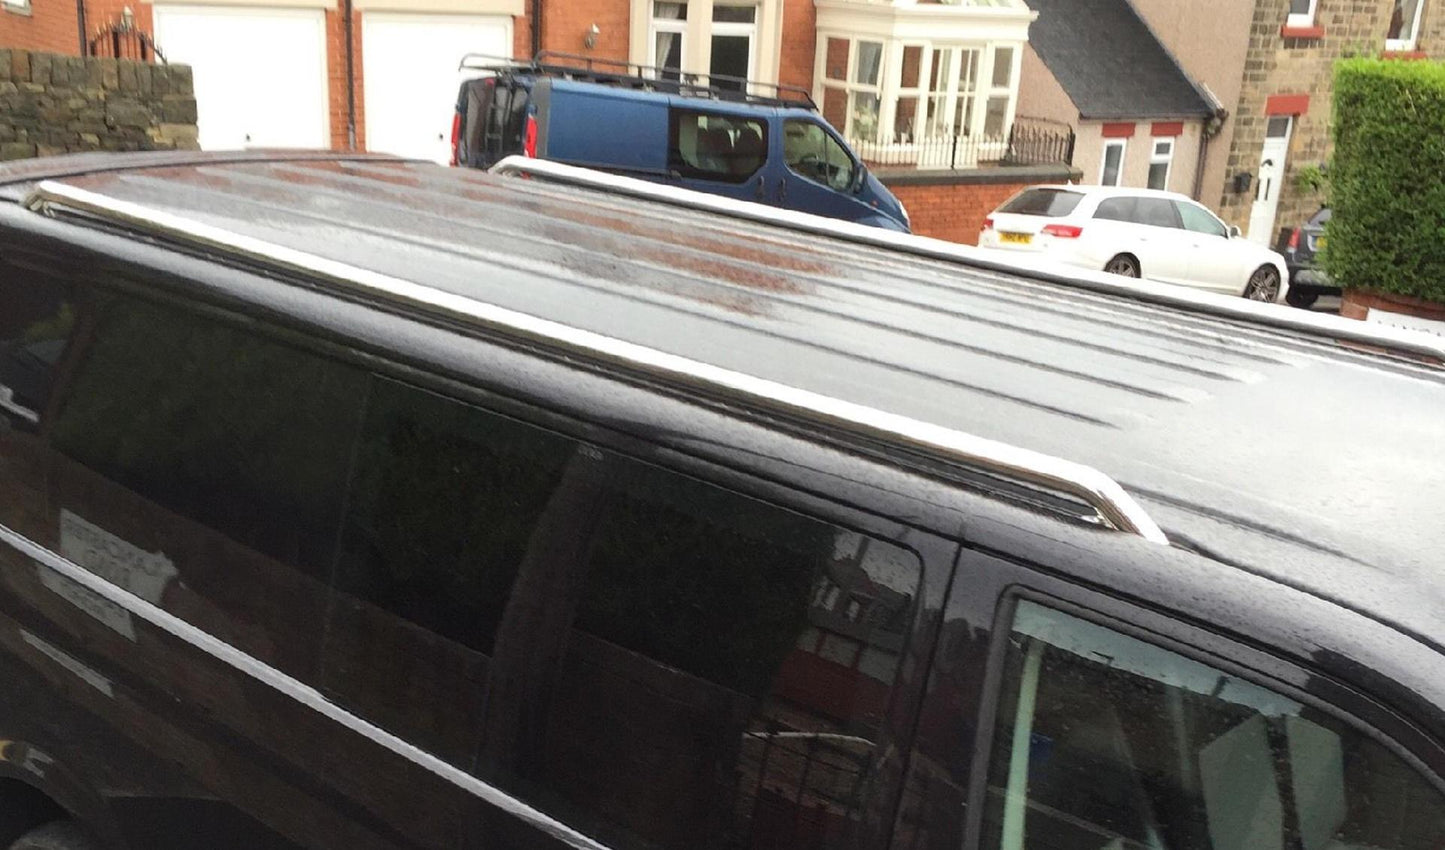 Stainless Steel OE Style Roof Rails for the Volkswagen Transporter T5 LWB -  - sold by Direct4x4